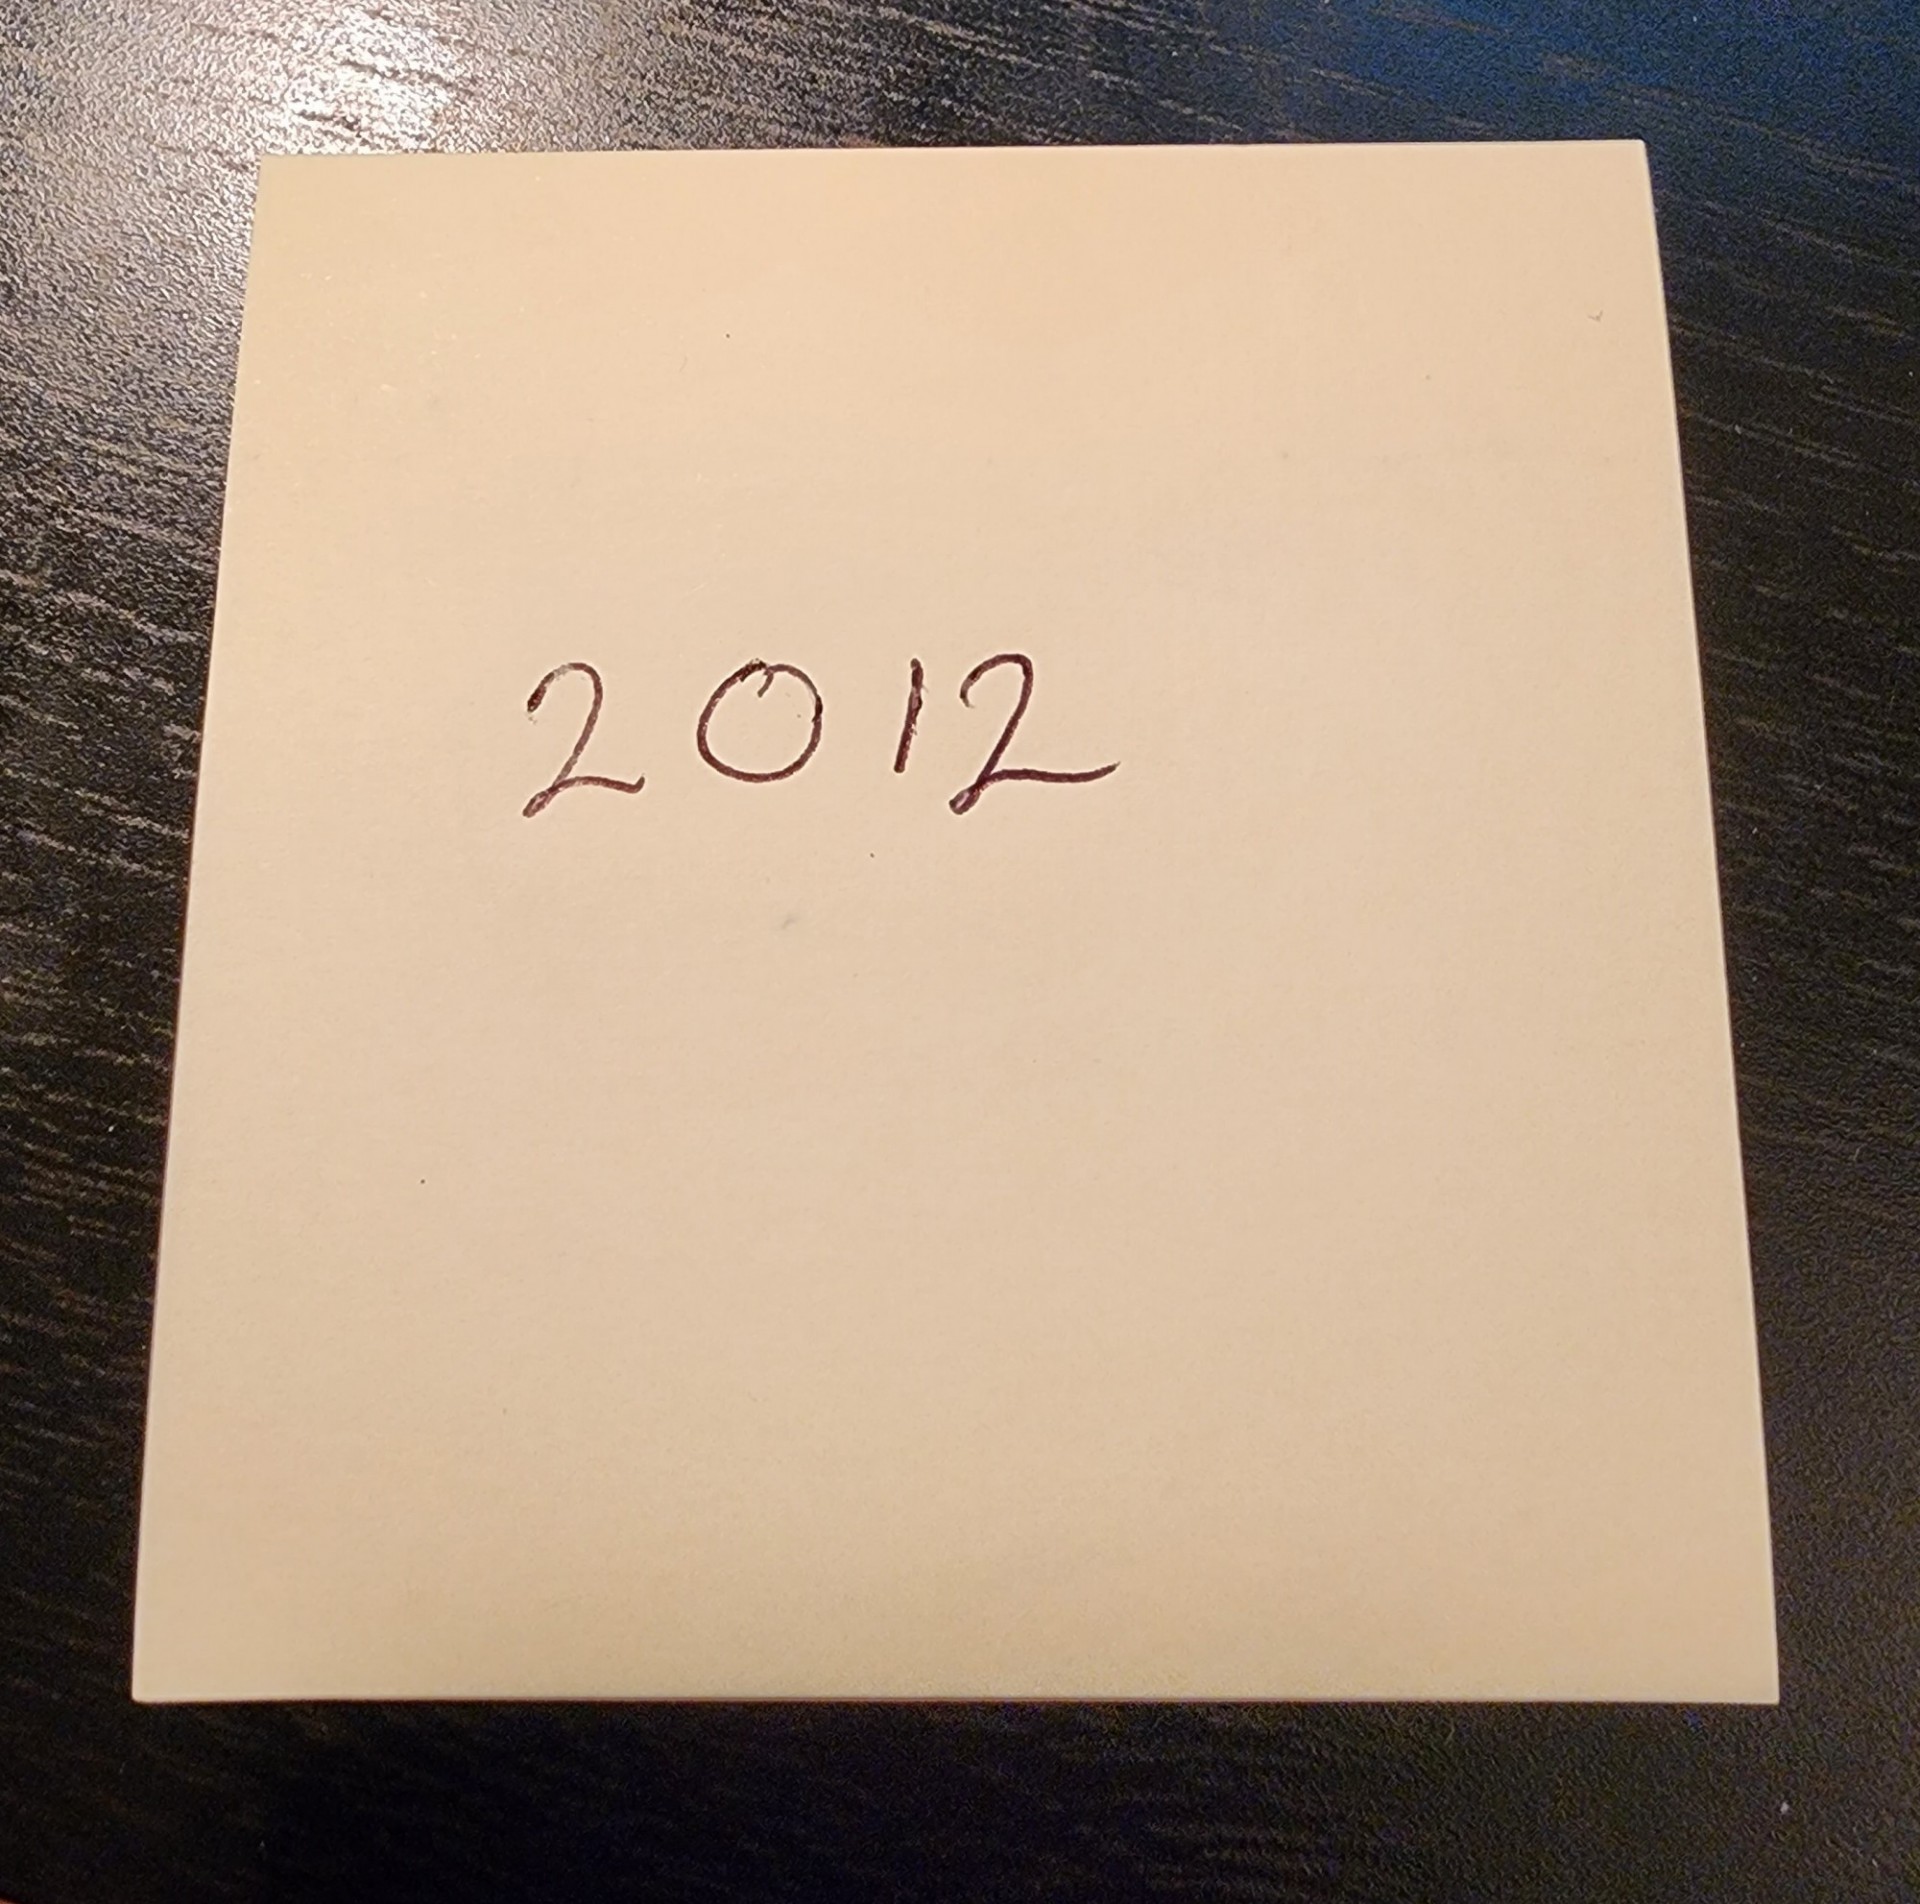 The year 2012 written on a post-it note